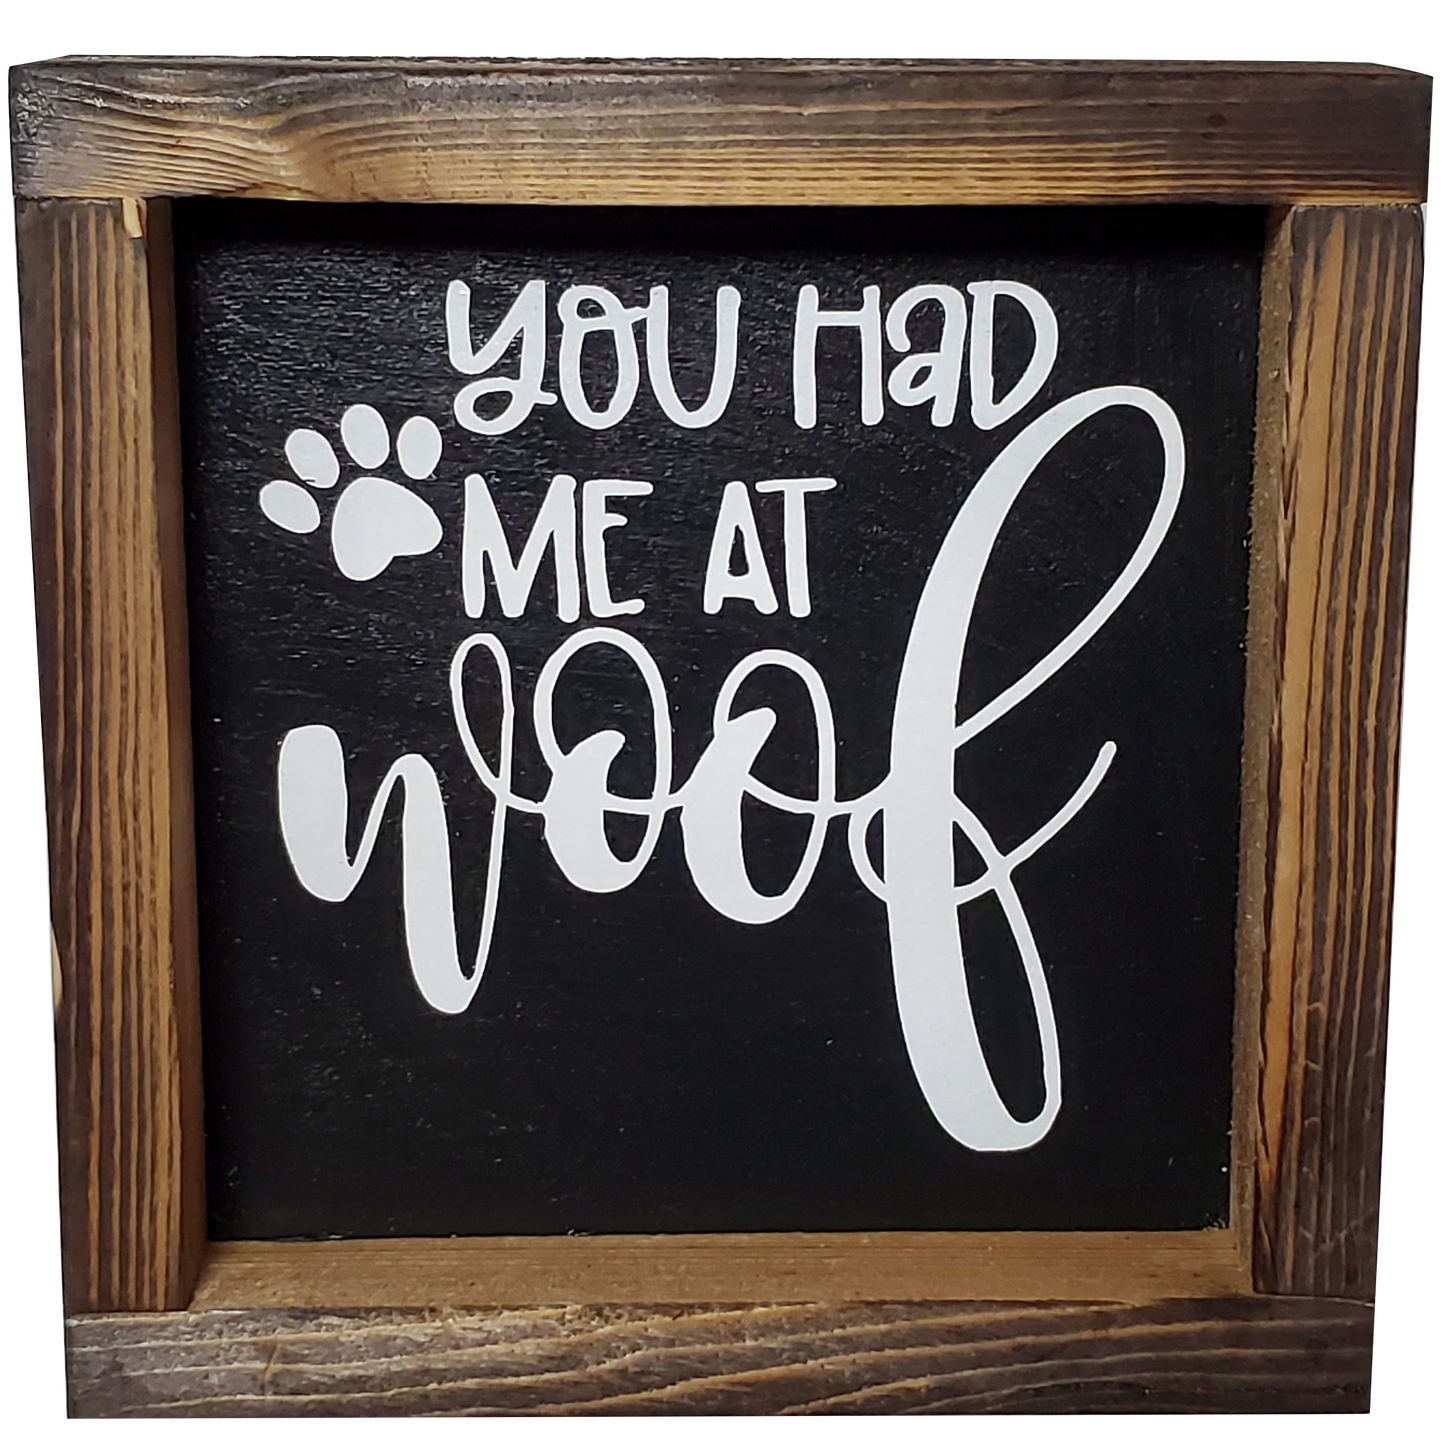 Dog-themed Sign with Distressed Farmhouse Finish - You Had Me at WOOF!